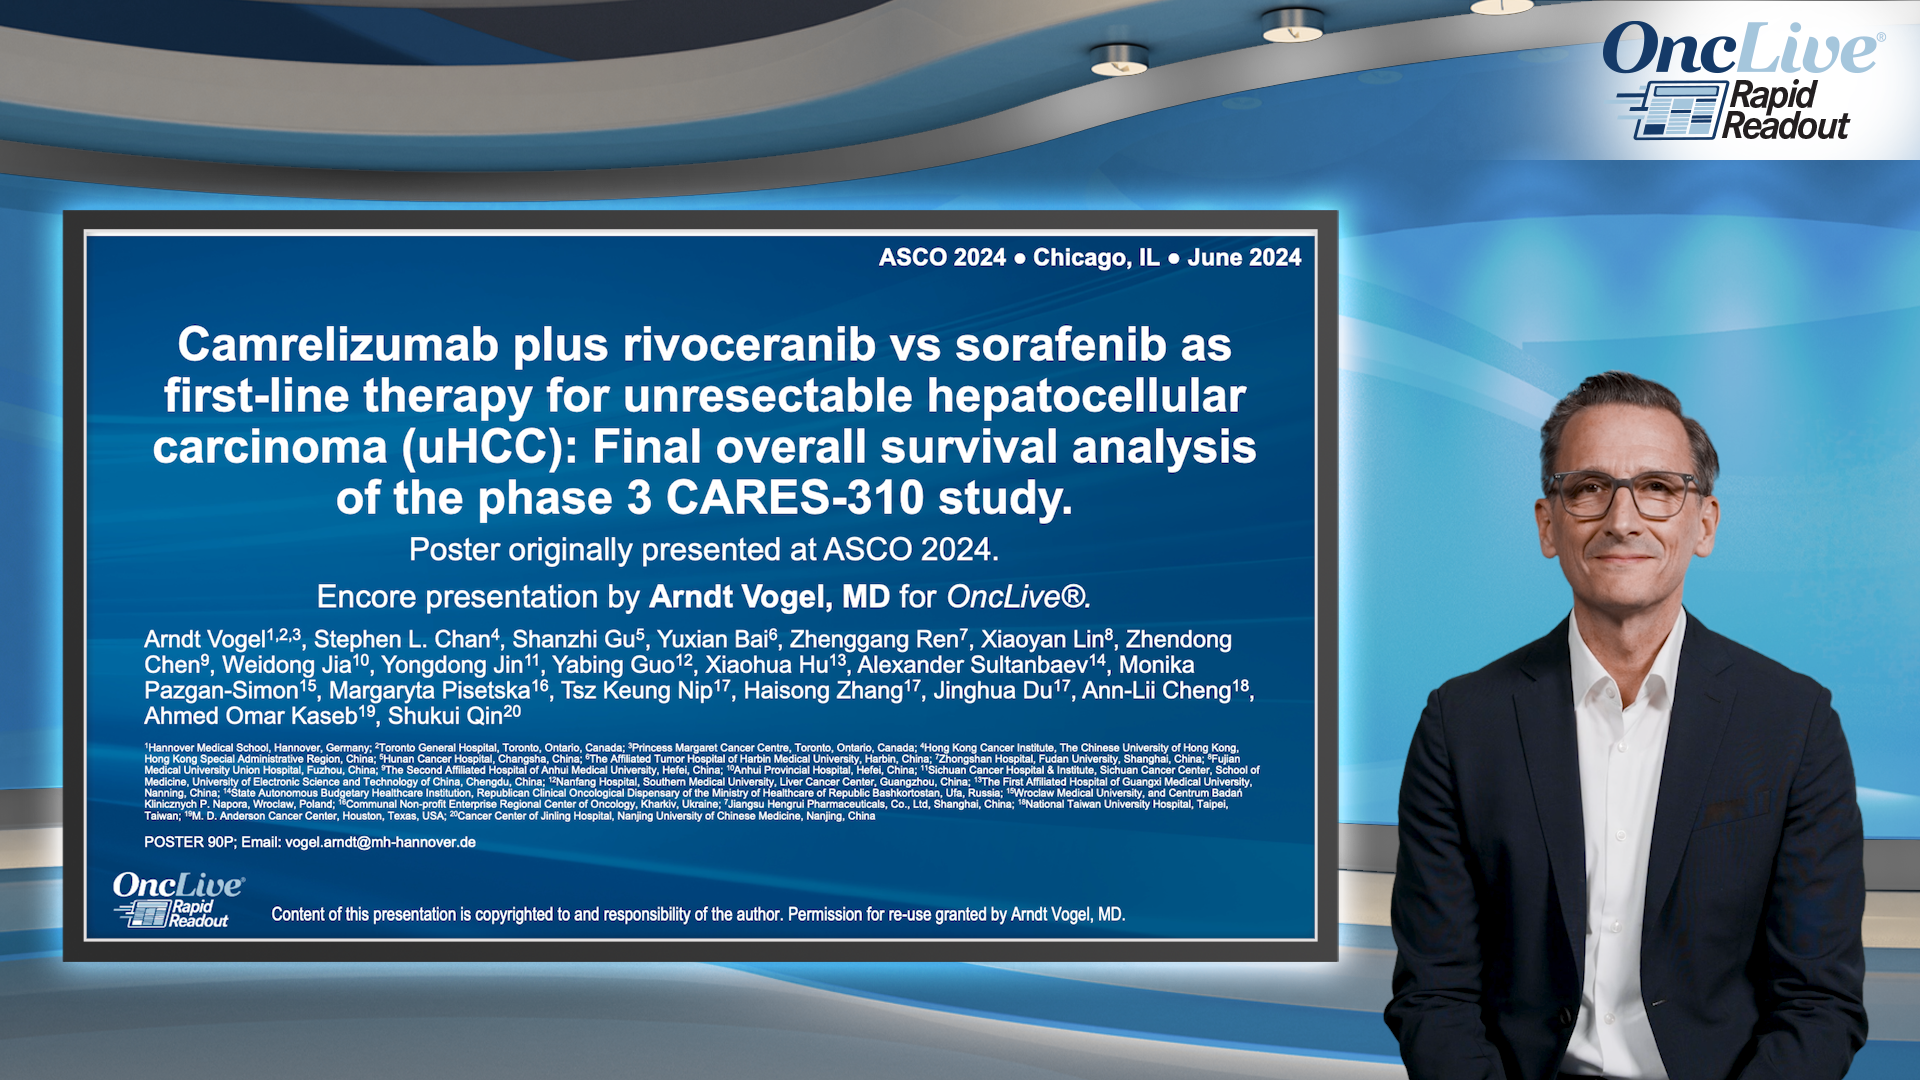 Camrelizumab plus rivoceranib vs sorafenib as first-line therapy for unresectable hepatocellular carcinoma (uHCC): Final overall survival analysis of the phase 3 CARES-310 study